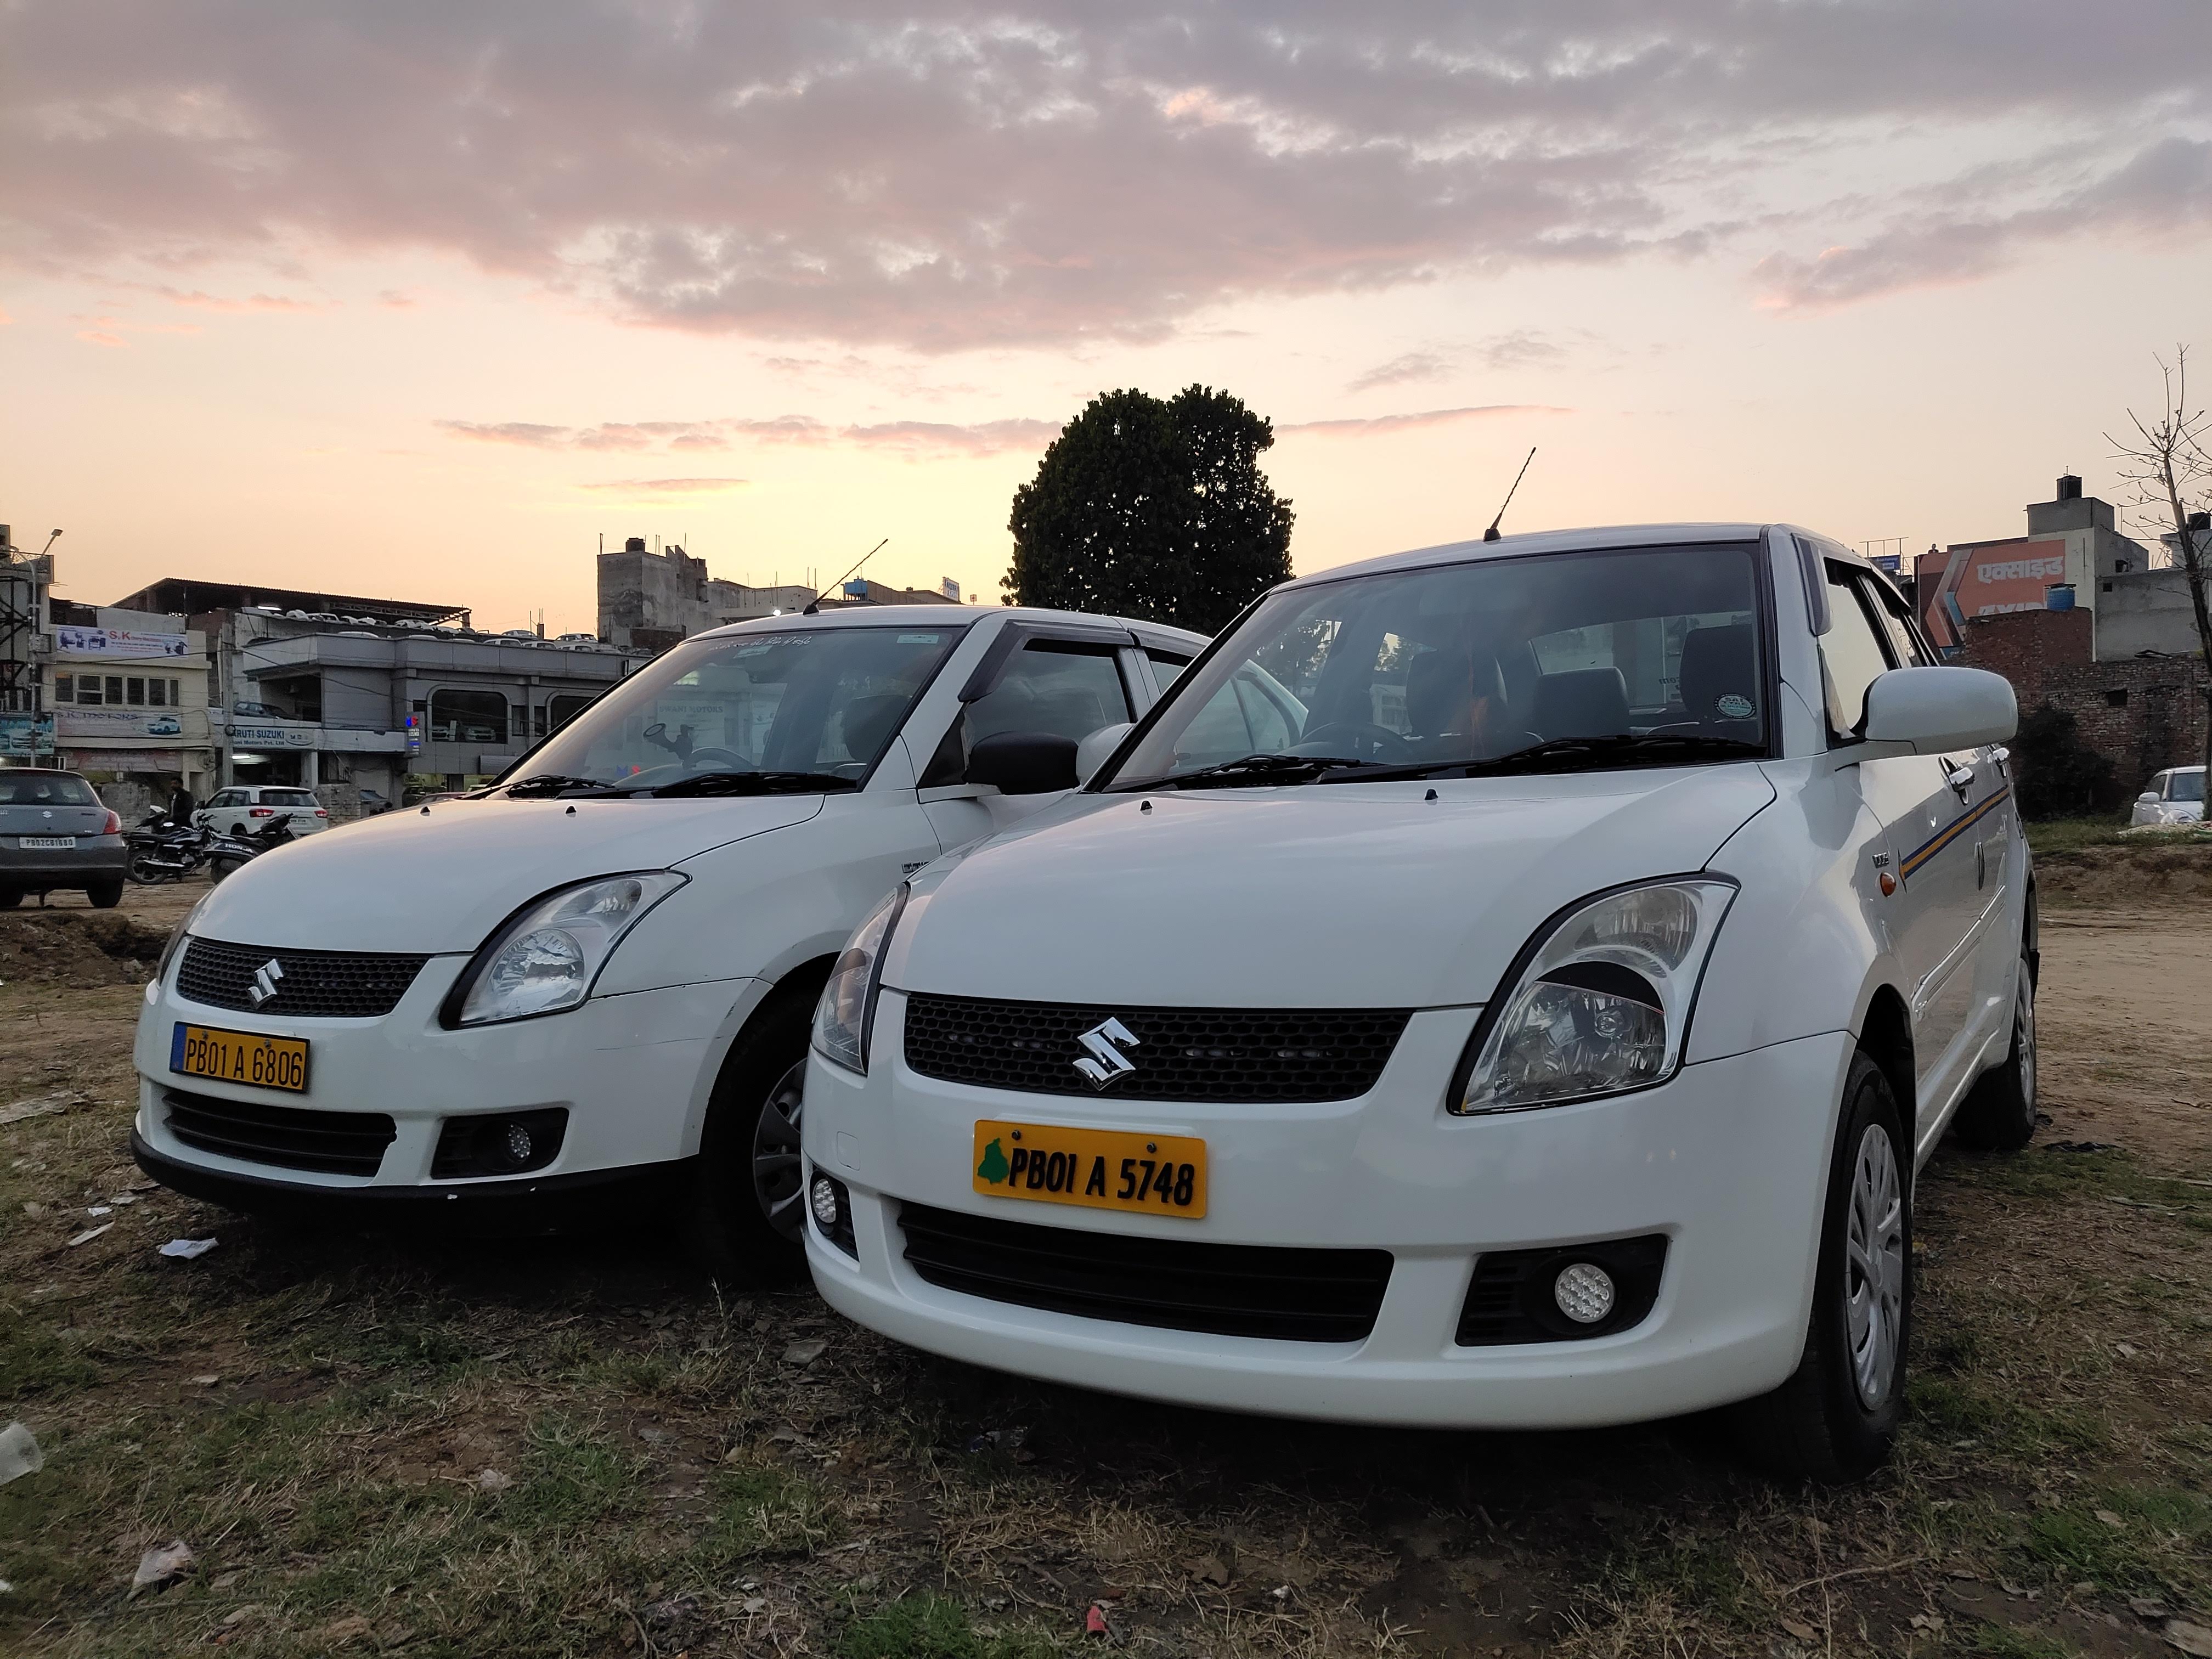 Car Rental in Punjab, India for Outstation Tours